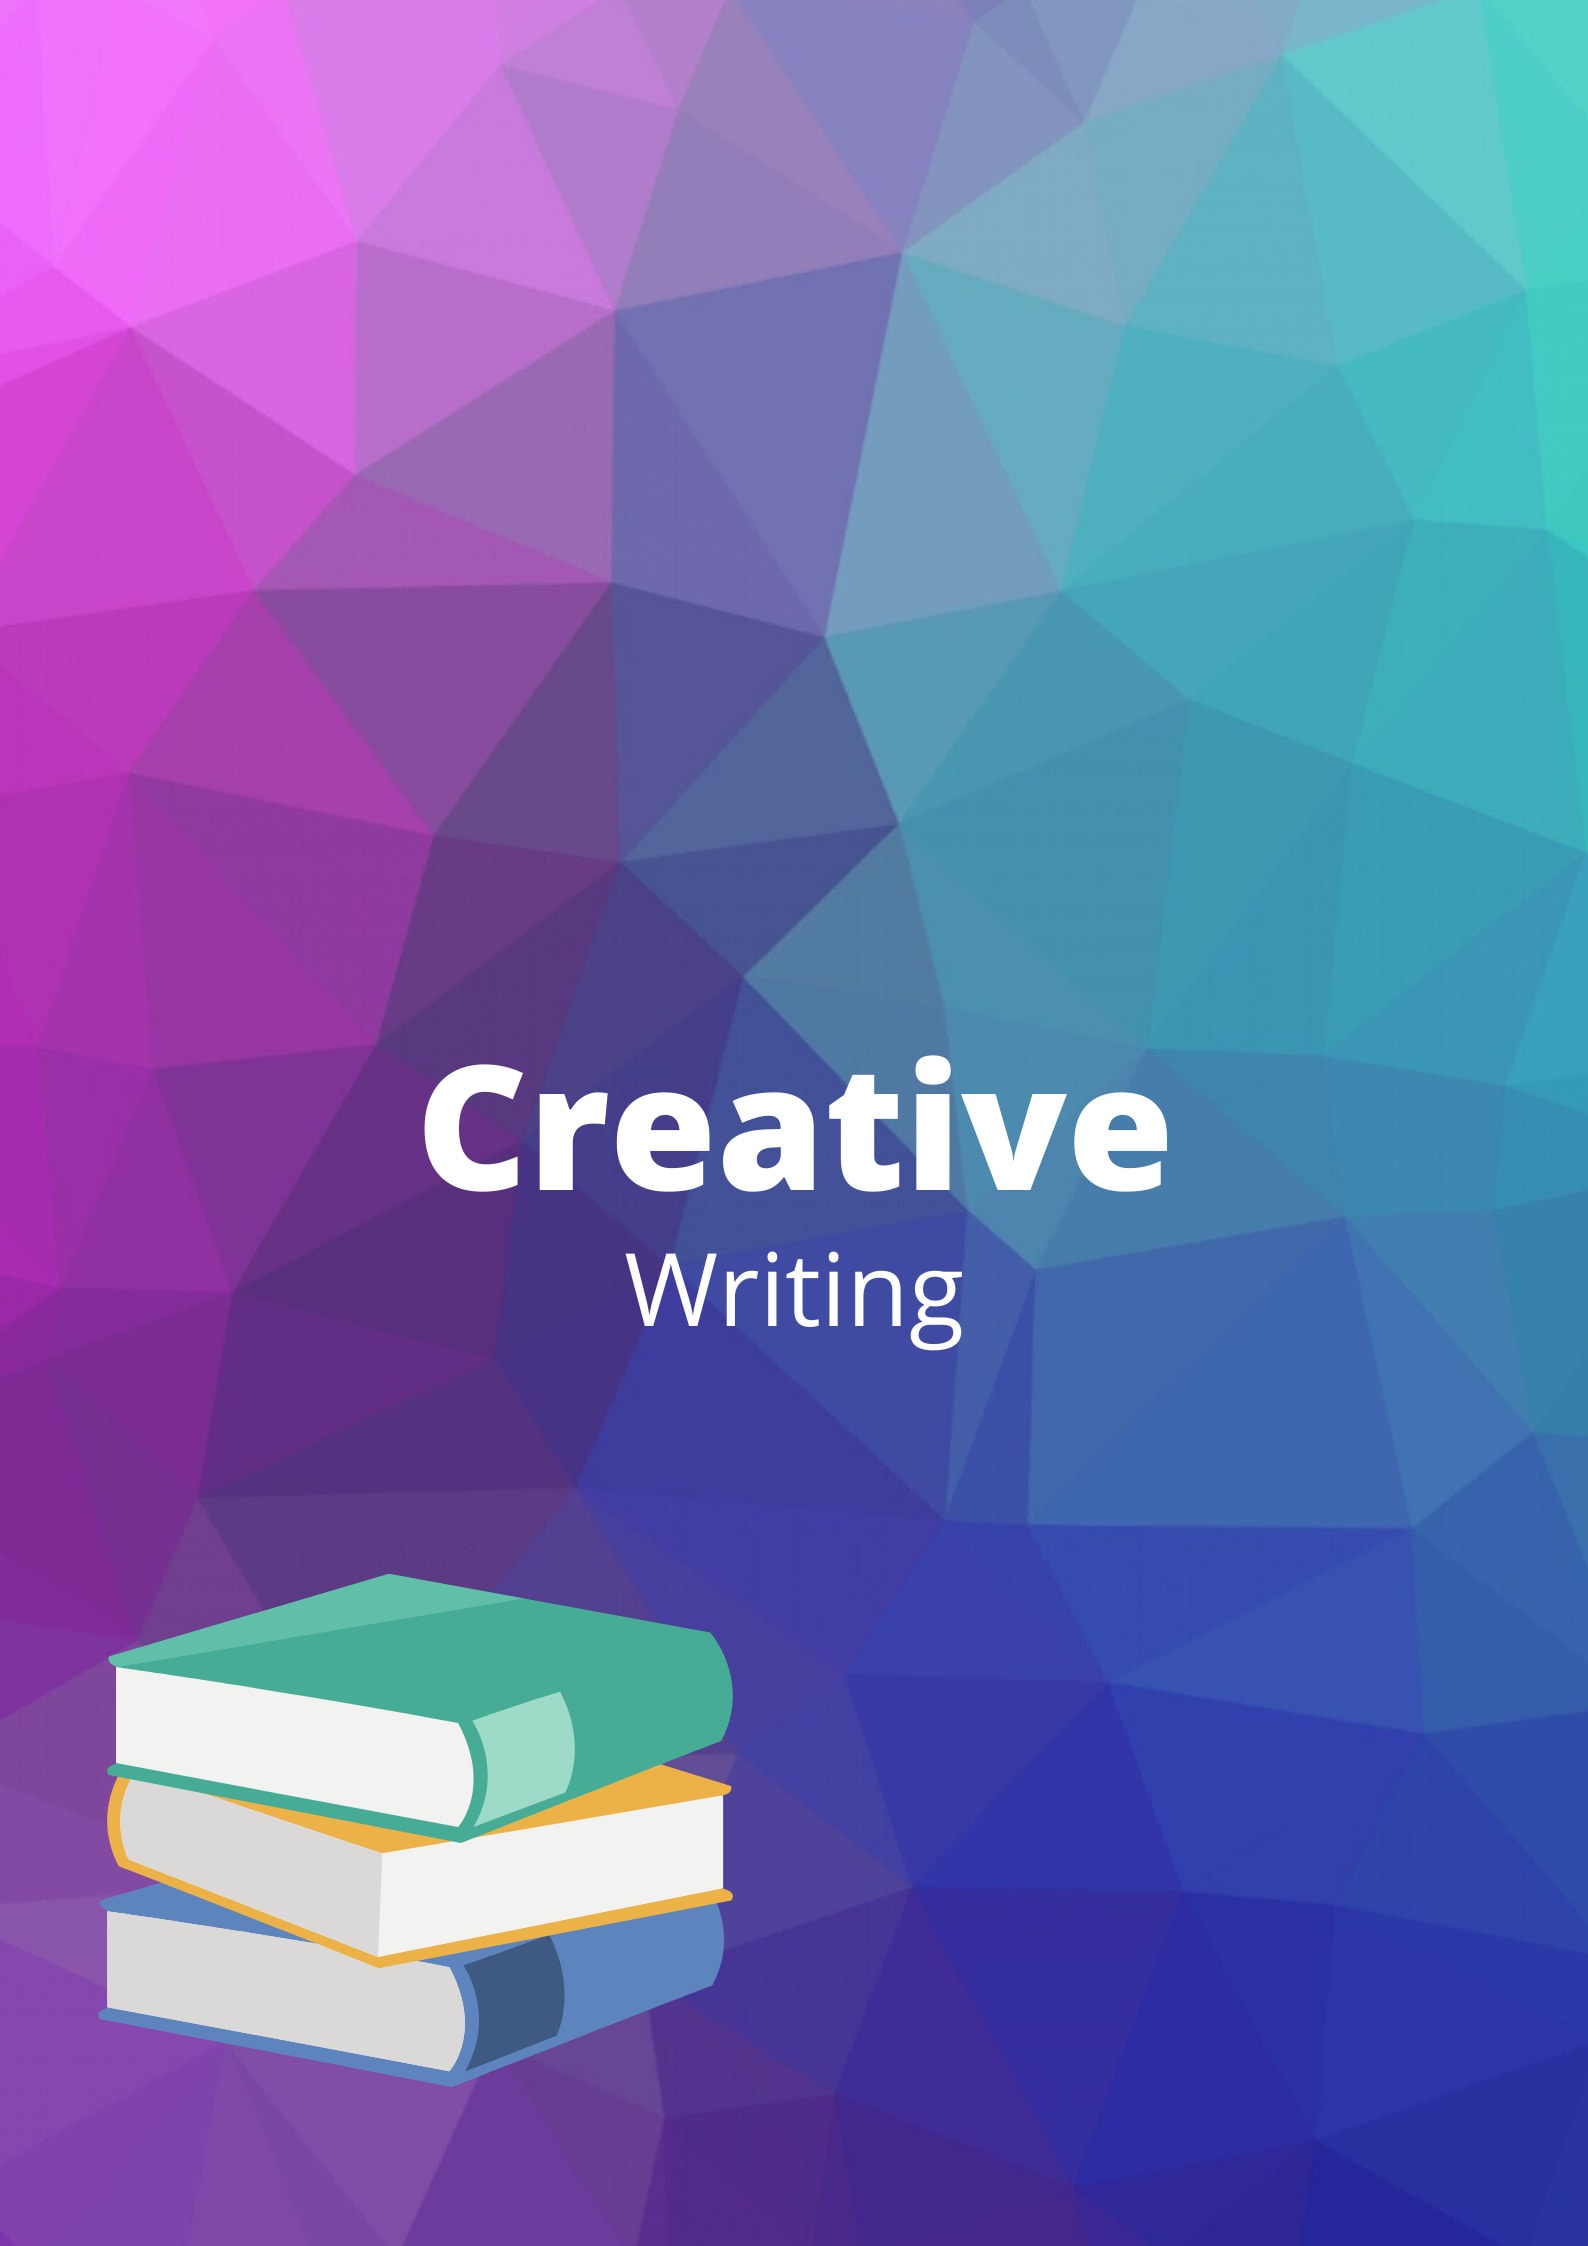 Write 21 word essay story and article for you by Usmanist  Fiverr